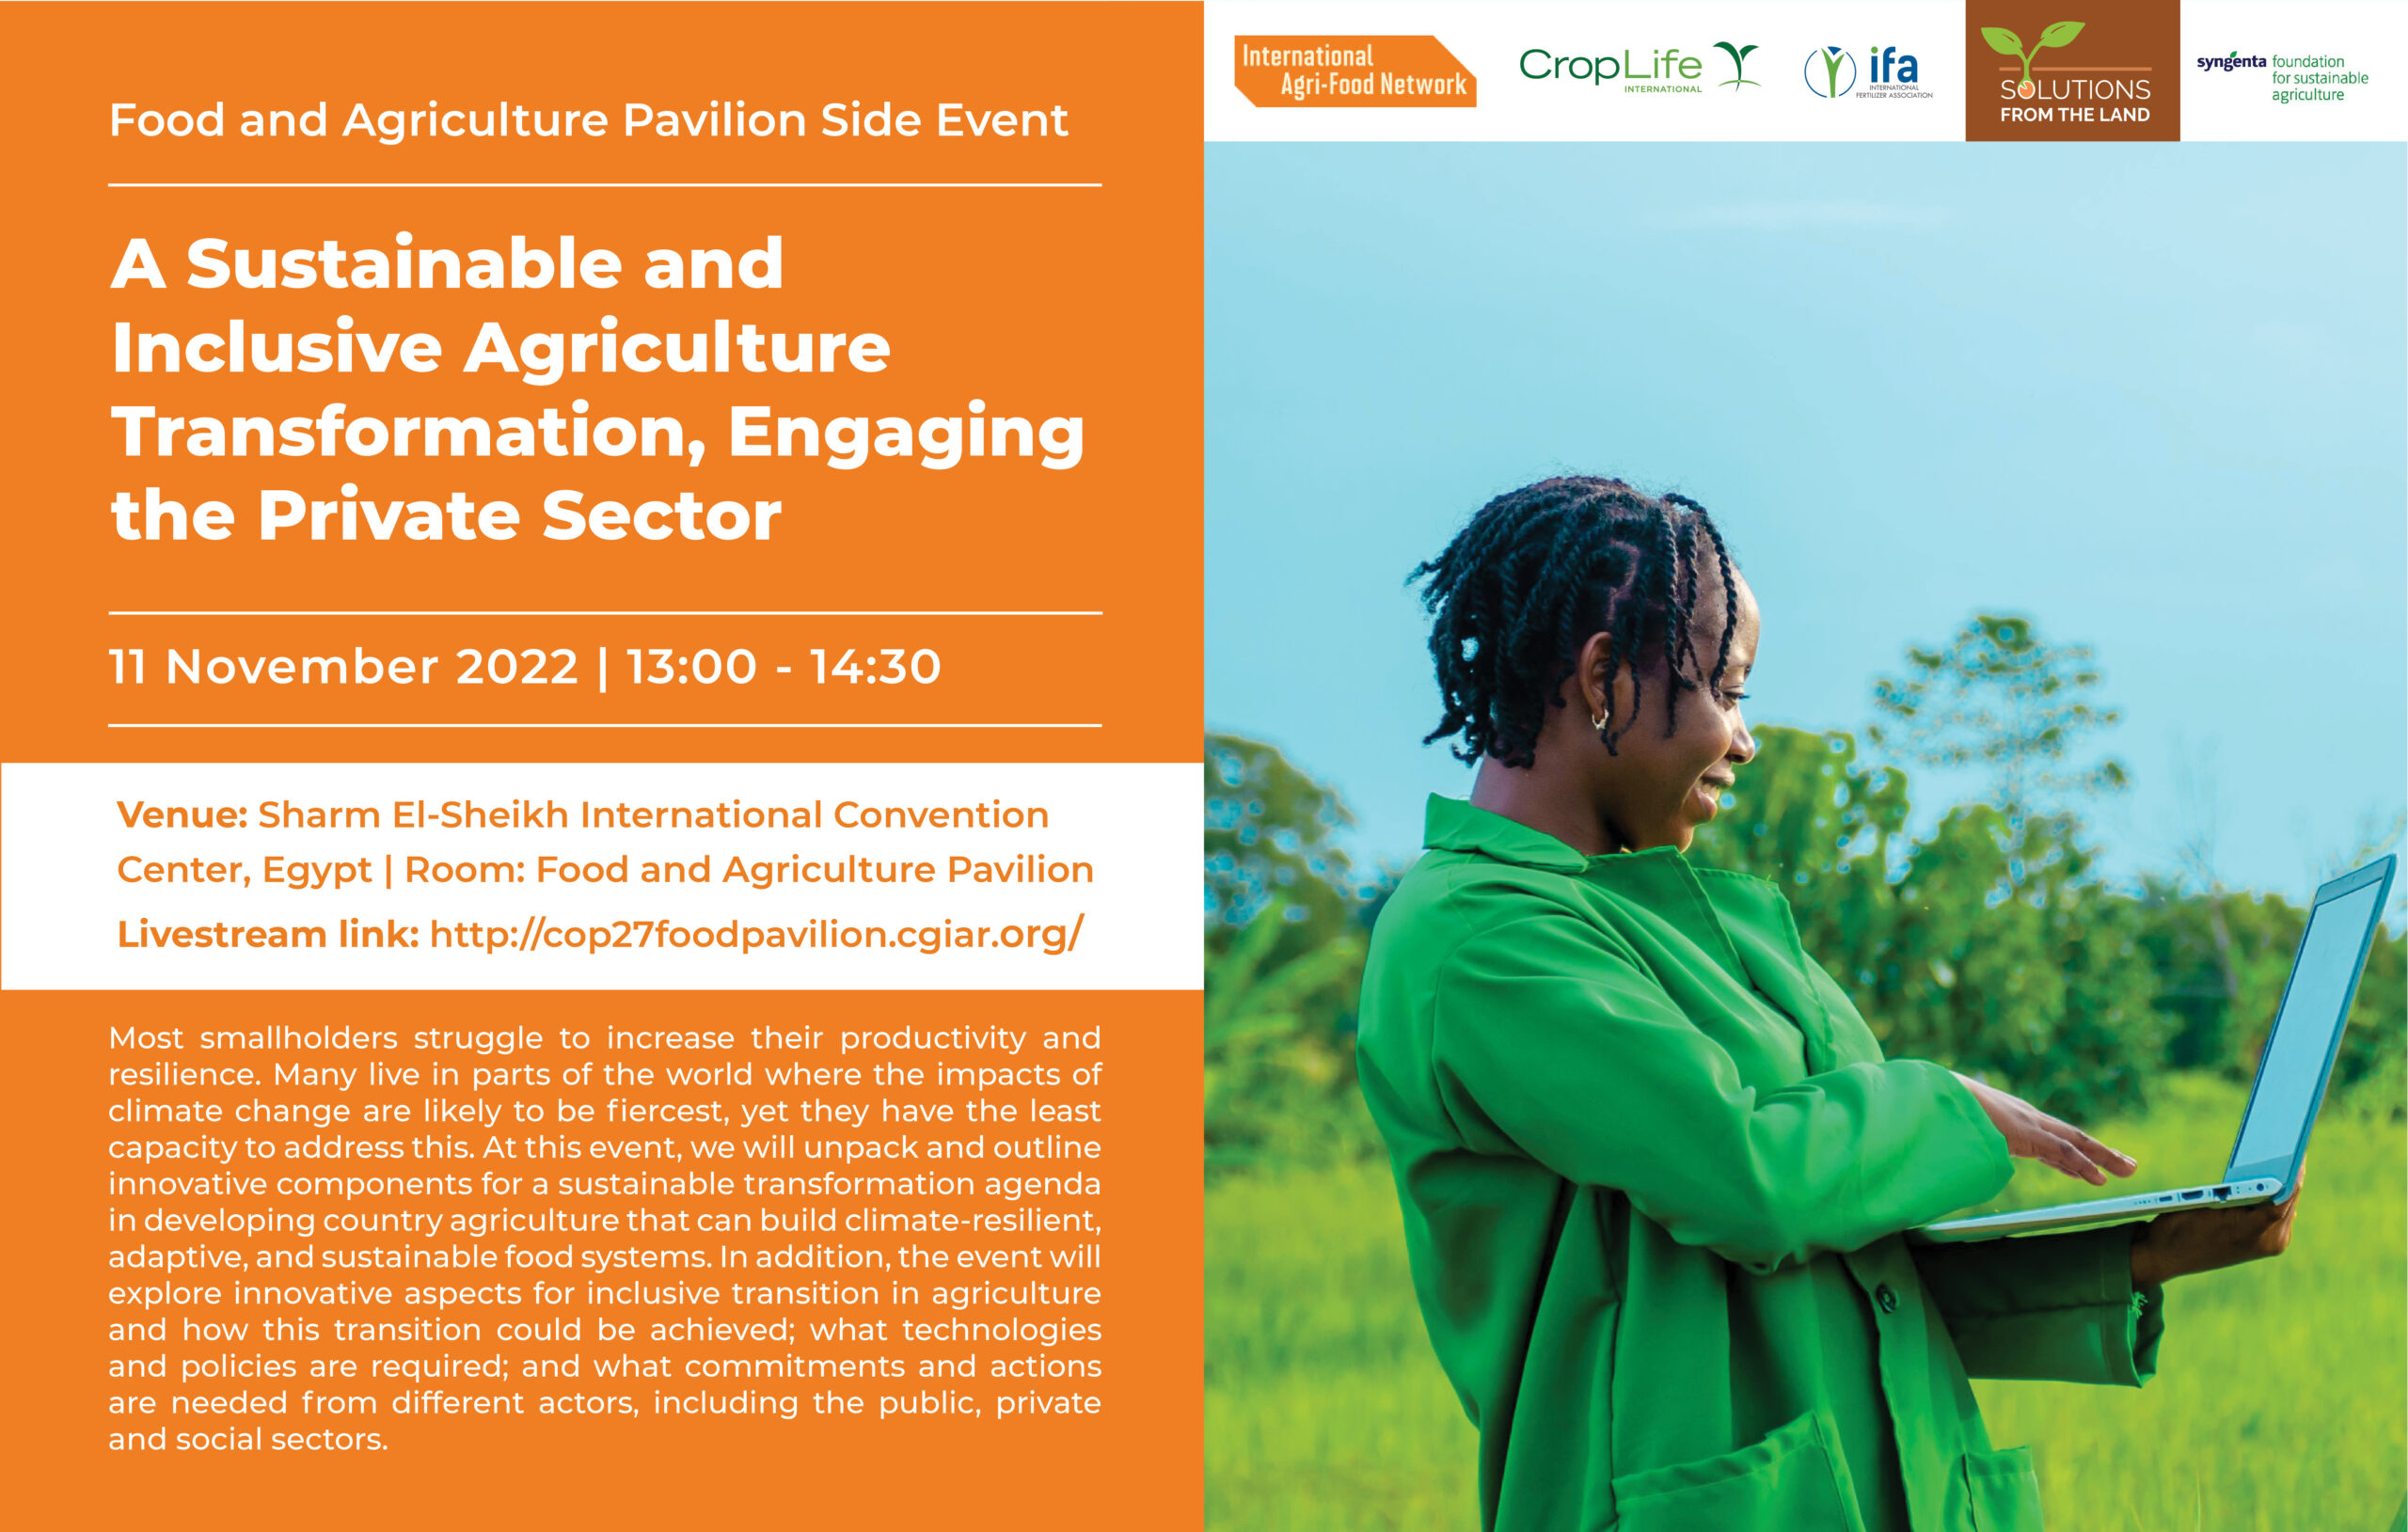 A sustainable and inclusive agriculture transformation, engaging the private sector